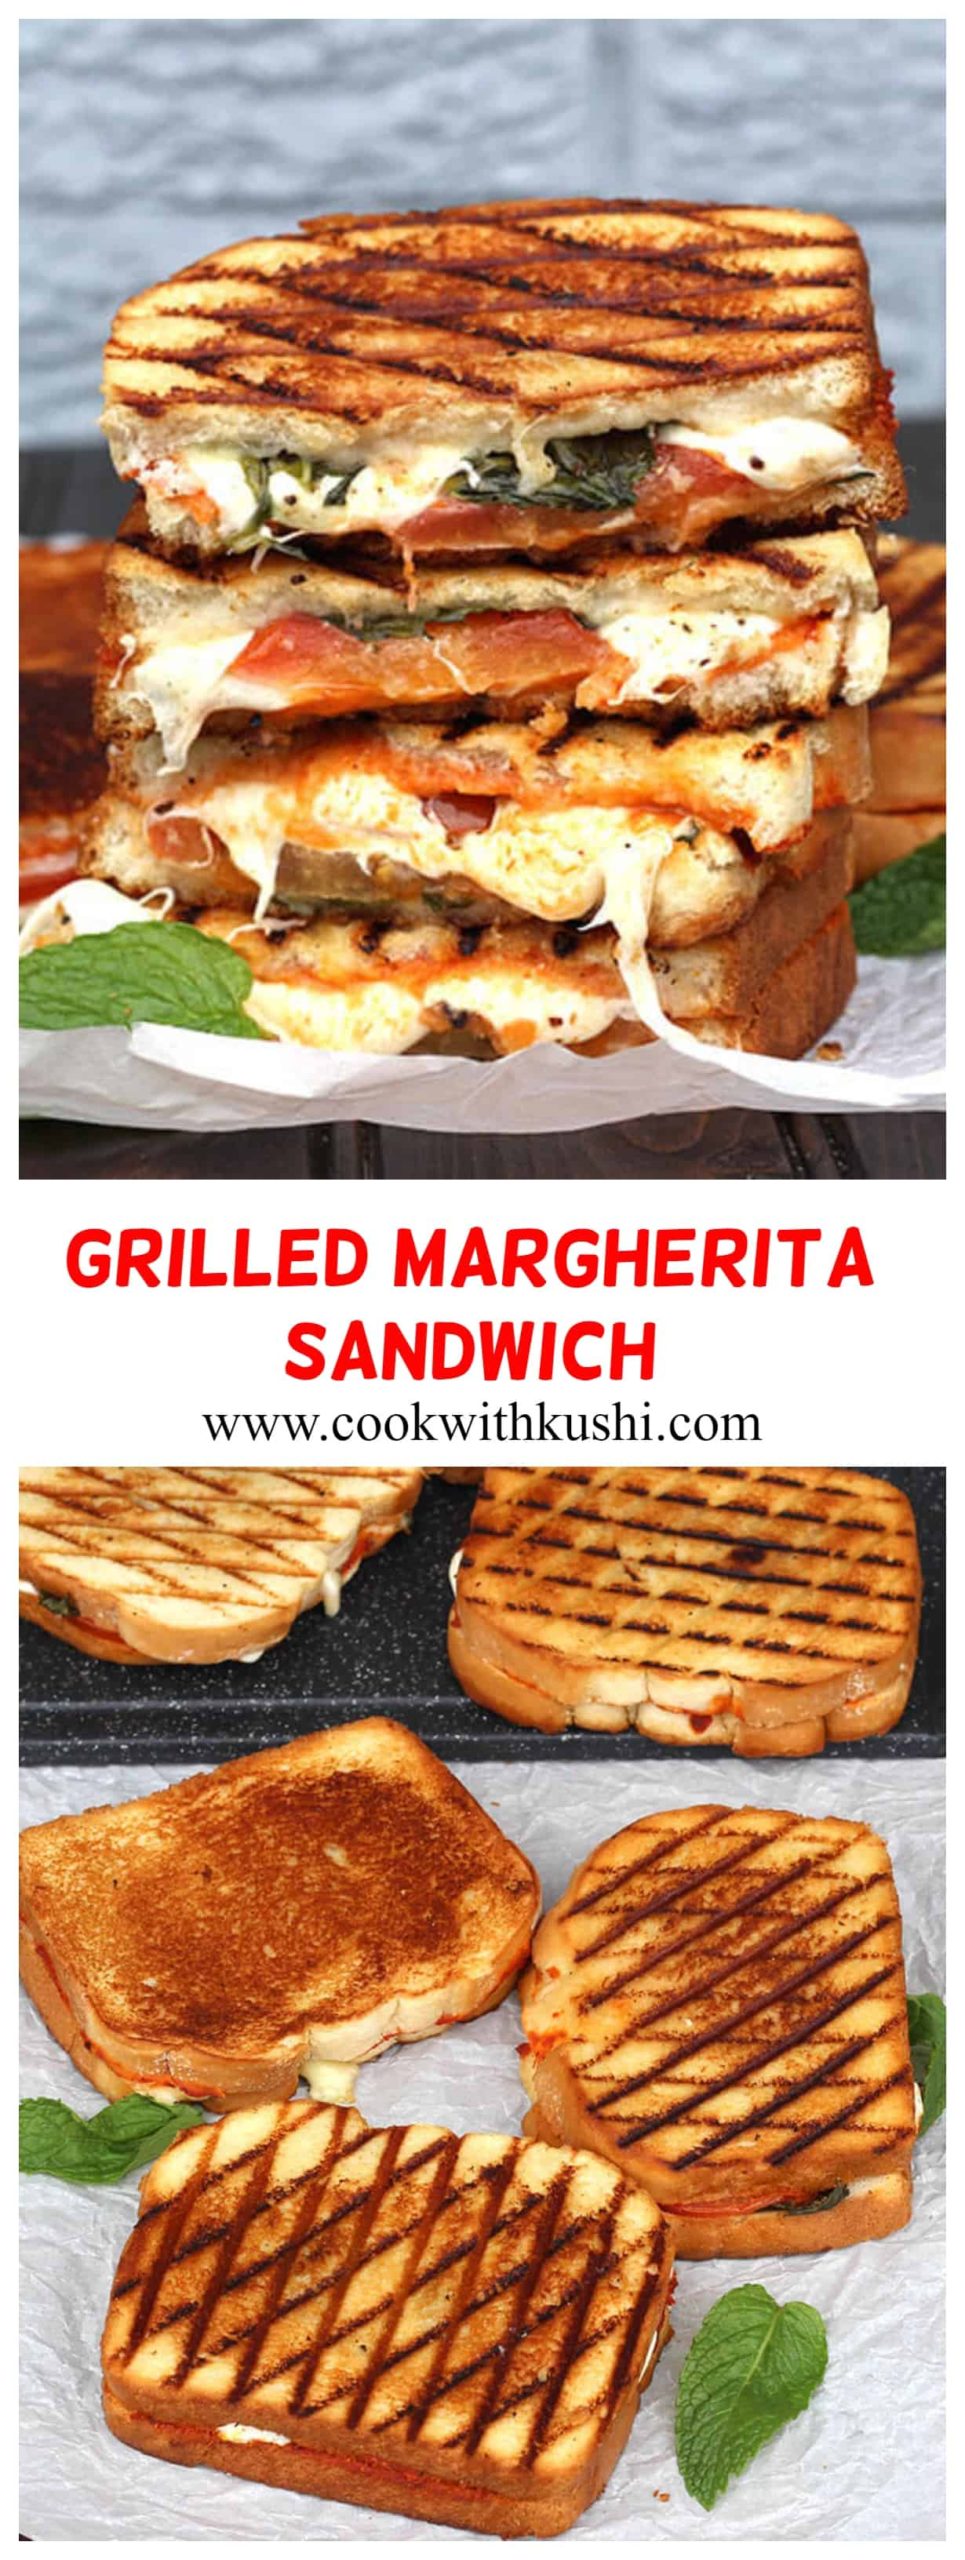 Grilled Margherita Sandwich or Pizza Sandwich is a fresh, light and flavorful sandwich prepared using delicious white bread and your favorite classic pizza ingredients #grilledsandwich #cheesesandwich #chickensandwich #eggsandwich #sandwichbread #sandwiches #clubsandwich #sandwichfordinner #pizzasandwich